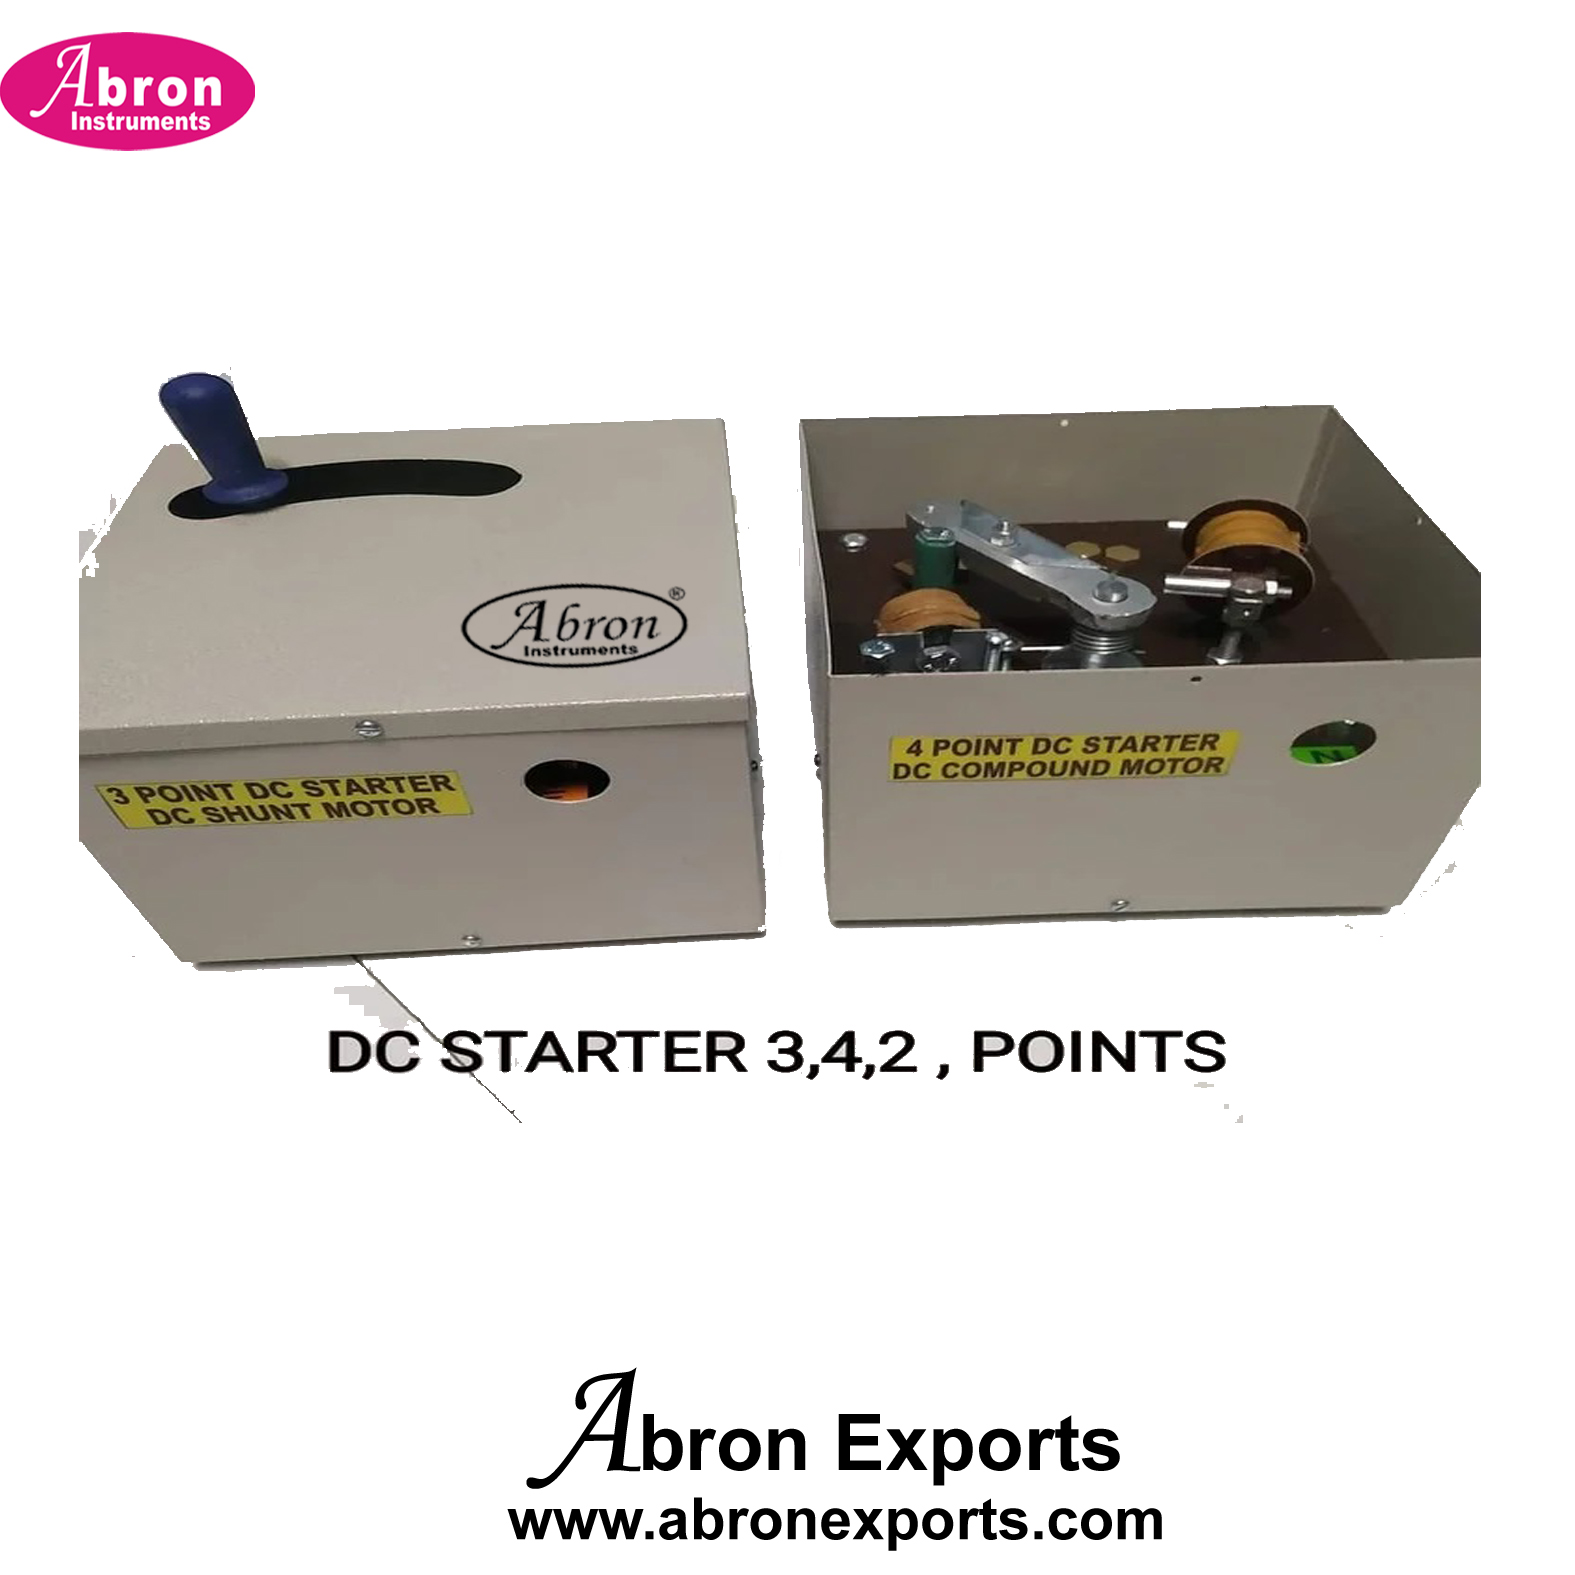 Motor DC Starters 3 or 4 Point Explosion Proof Steet Box Abron AE-8462S34 